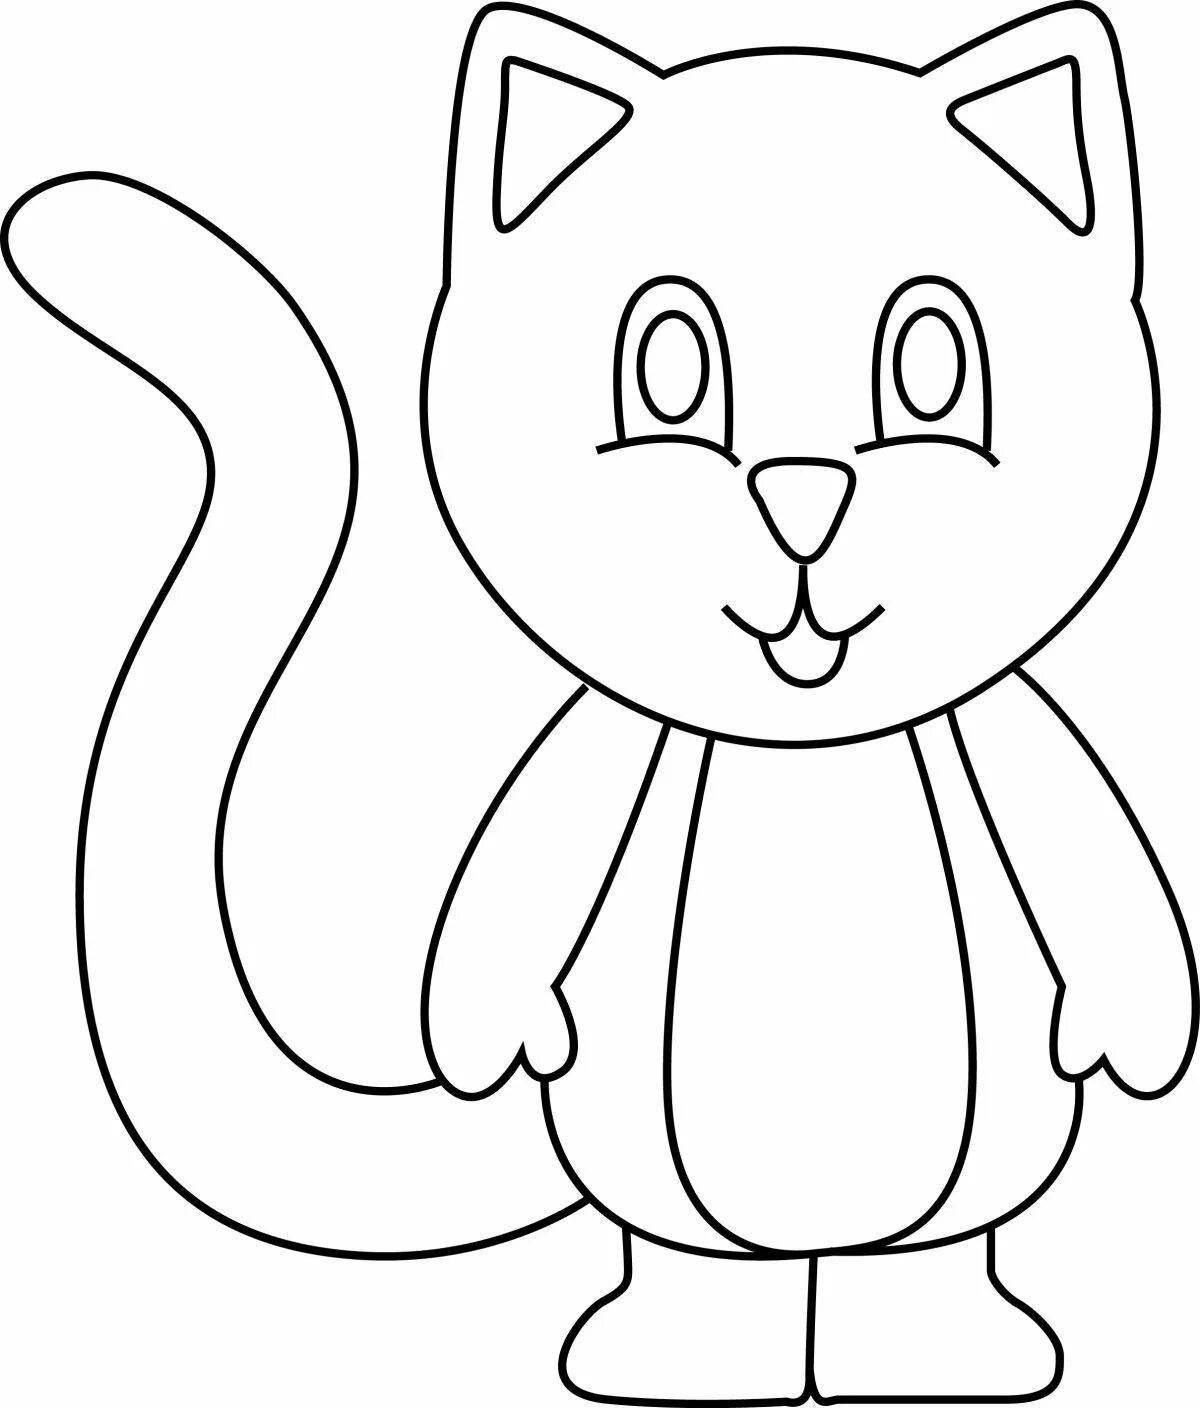 Adorable kitty coloring book for 2-3 year olds